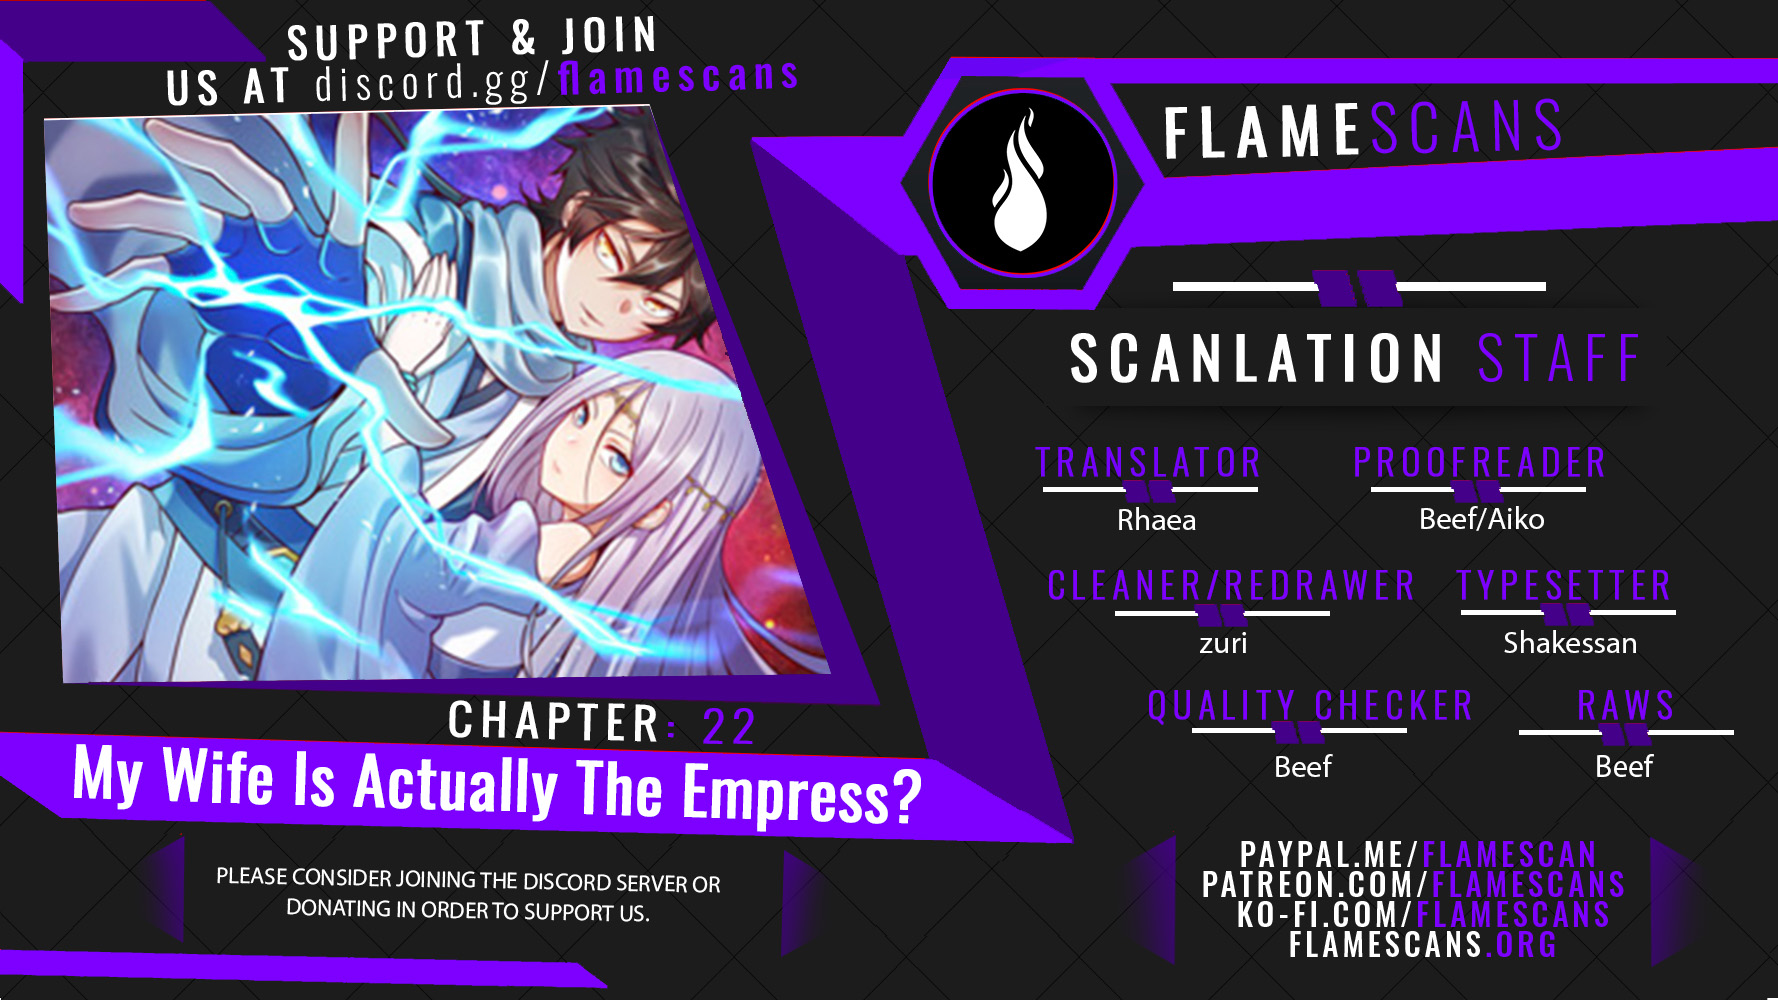 My Wife Is Actually The Empress? - Chapter 5061 - Image 1